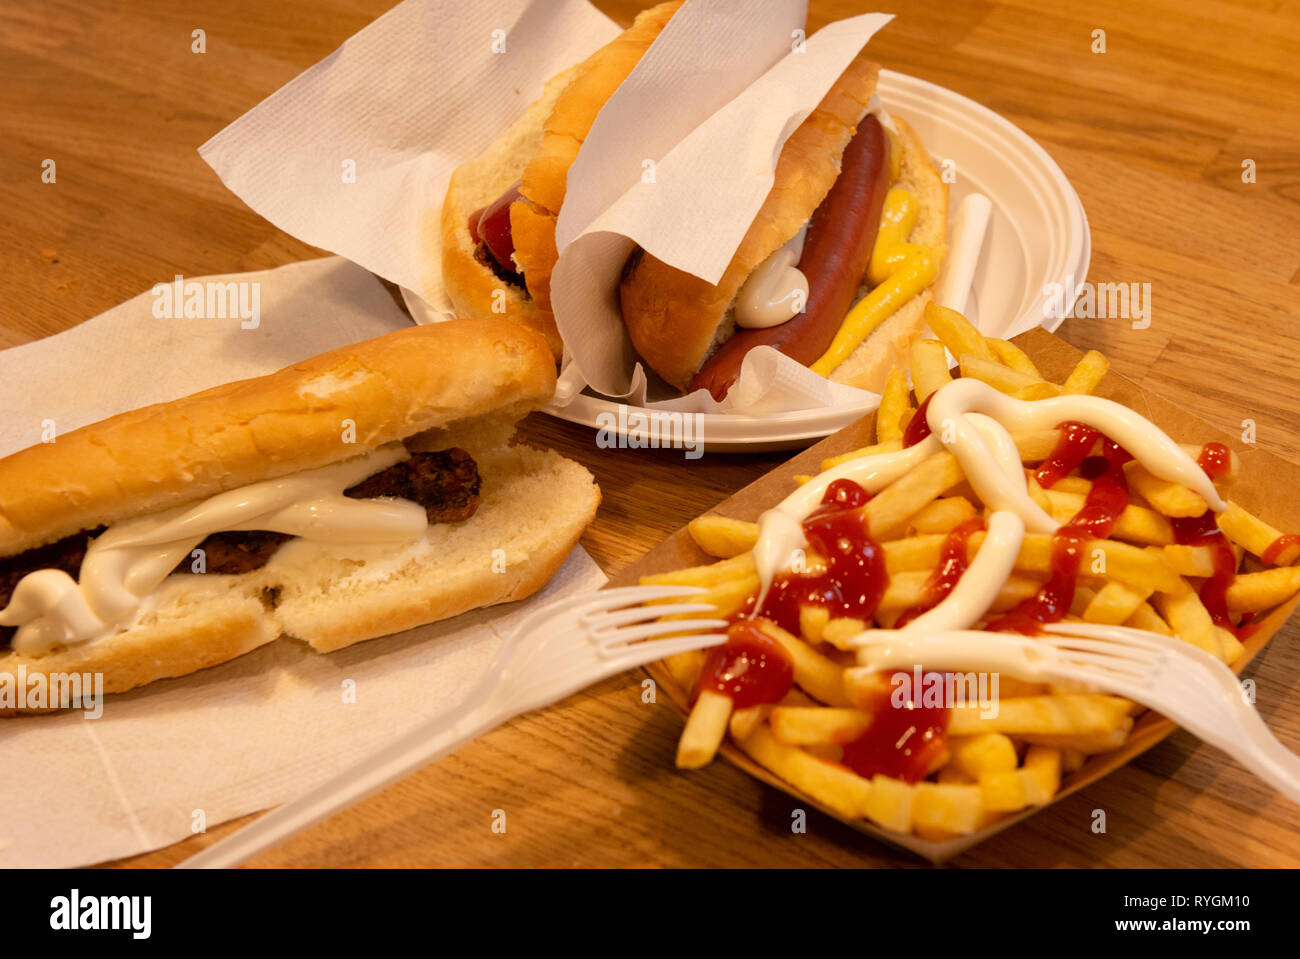 Ikea hot dog food and chips with disposable utensils as Ikea fast food dining Stock Photo